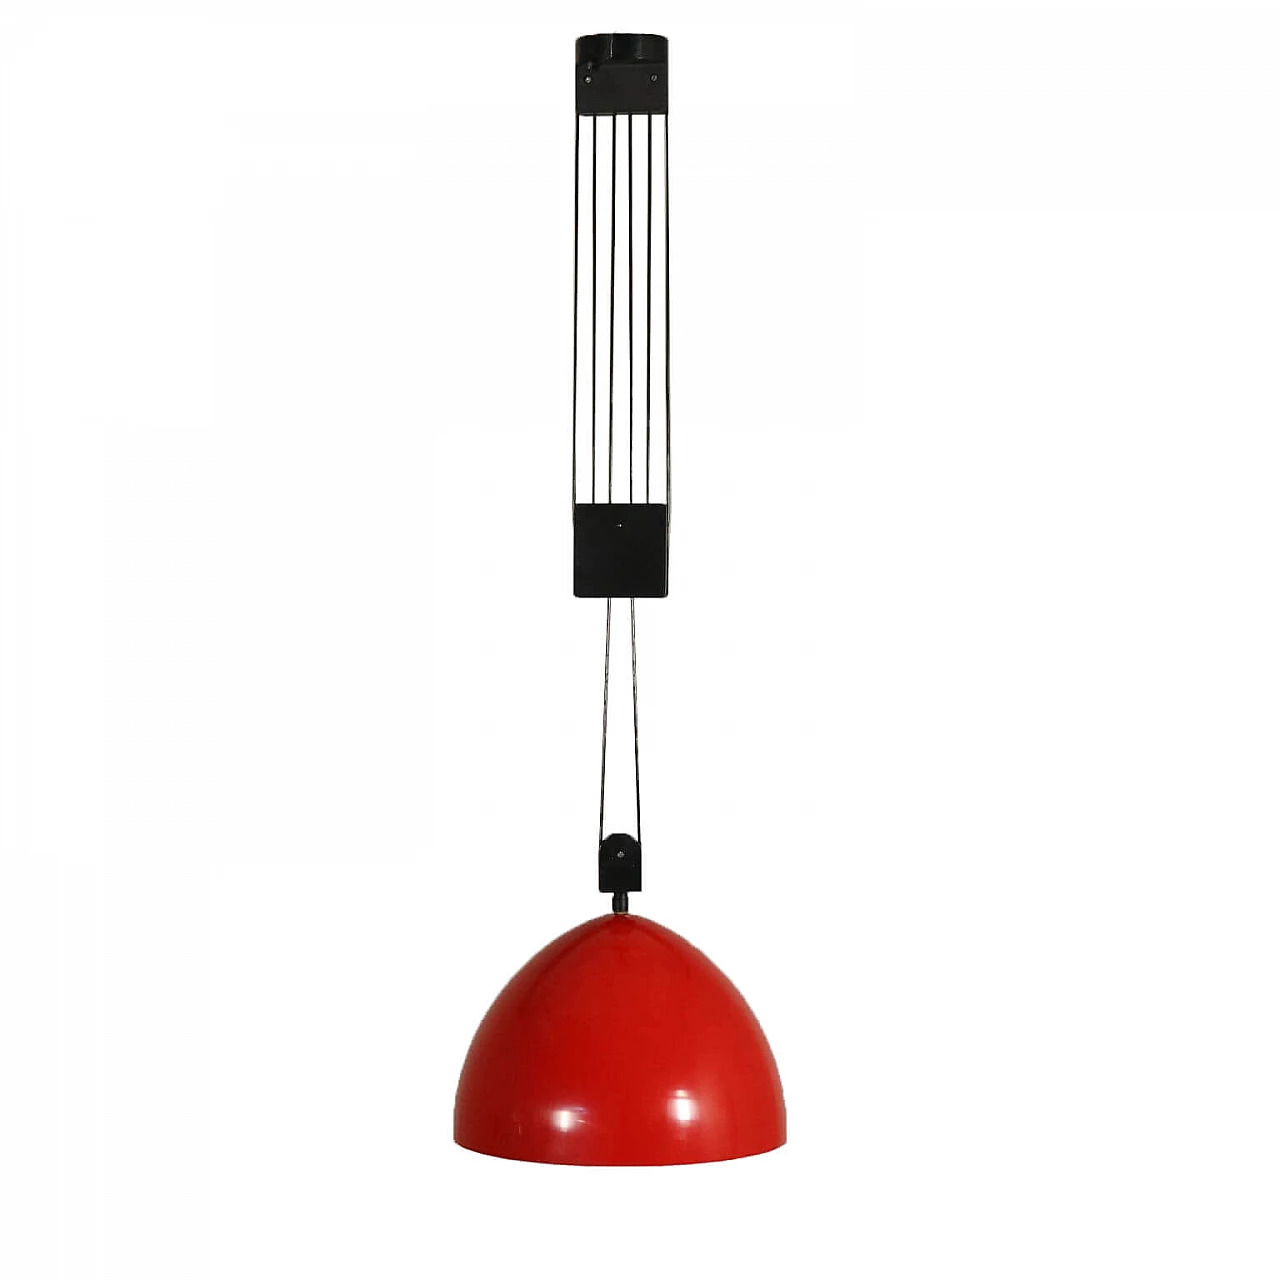 Lamp 1863 S by Gae Aulenti for Martinelli Luce, 1960s 1071069